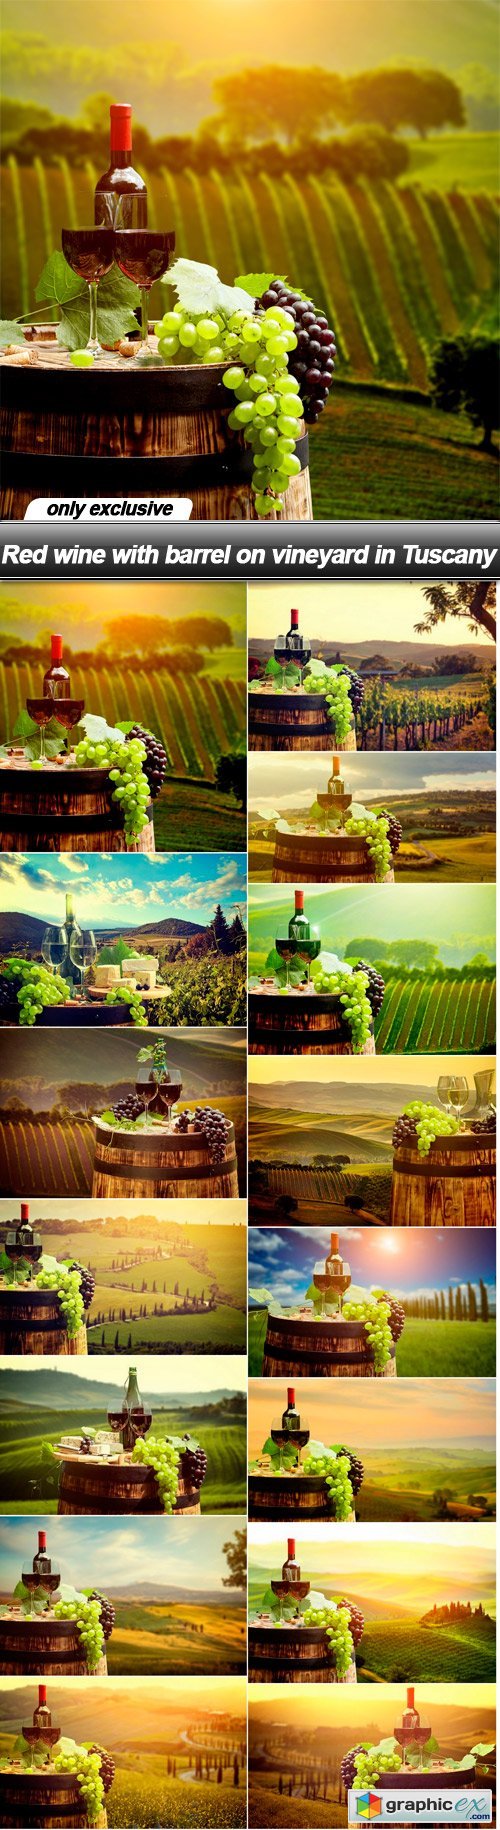 Red wine with barrel on vineyard in Tuscany - 15 UHQ JPEG